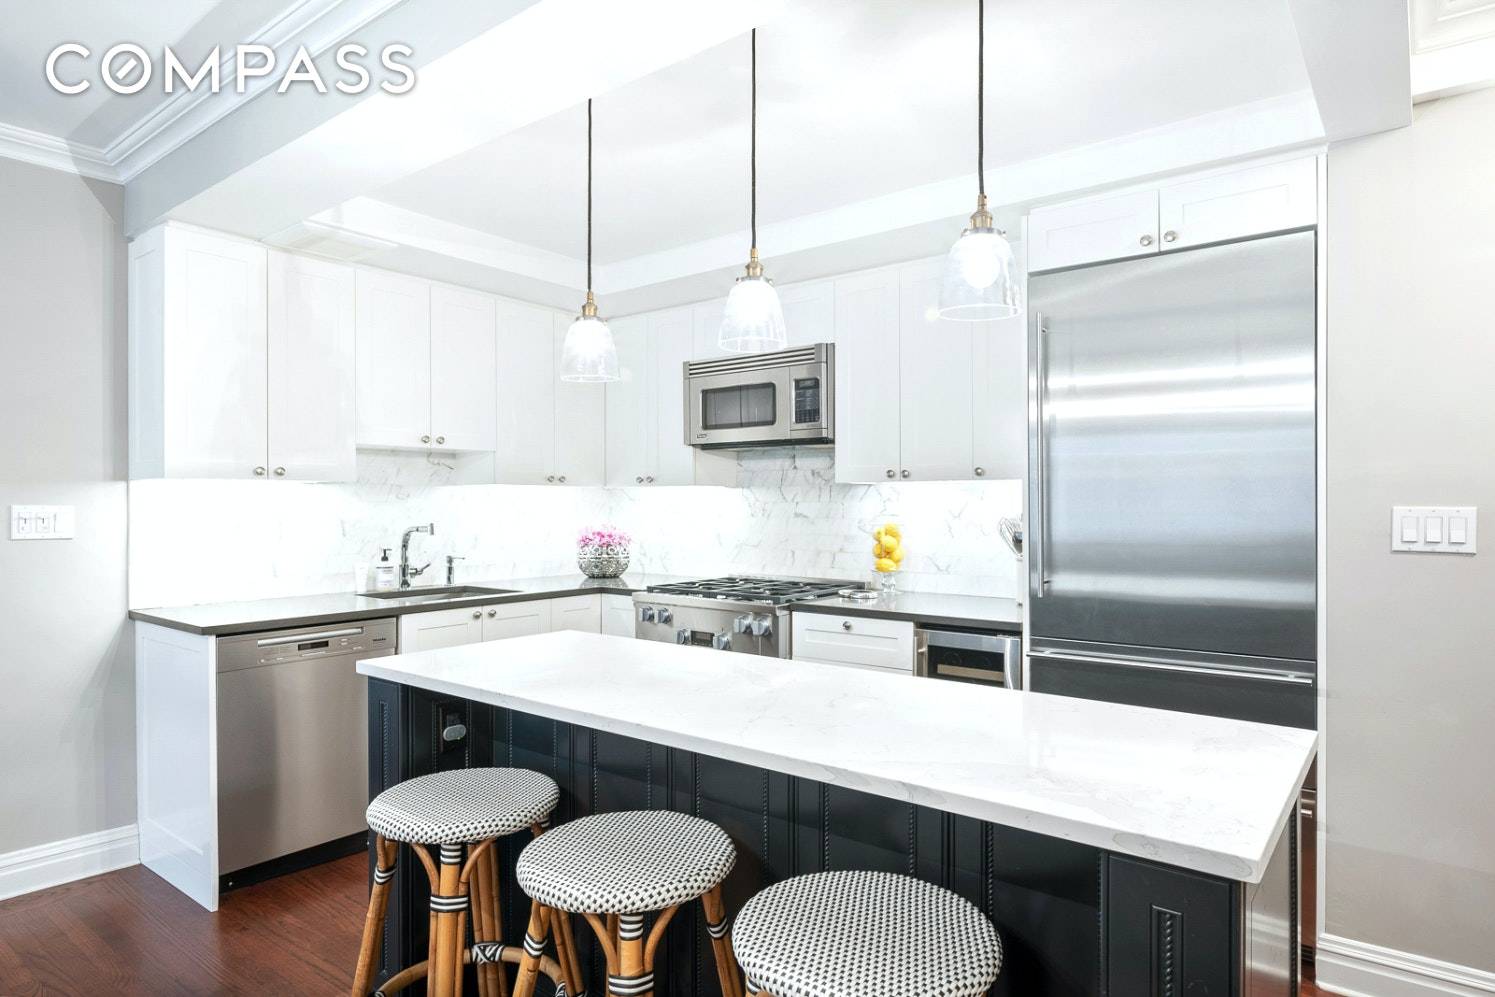 Impeccably renovated 3 bedroom 3 bath home in an Emory Roth coop on one of the most coveted, tree lined blocks on the Upper East Side.